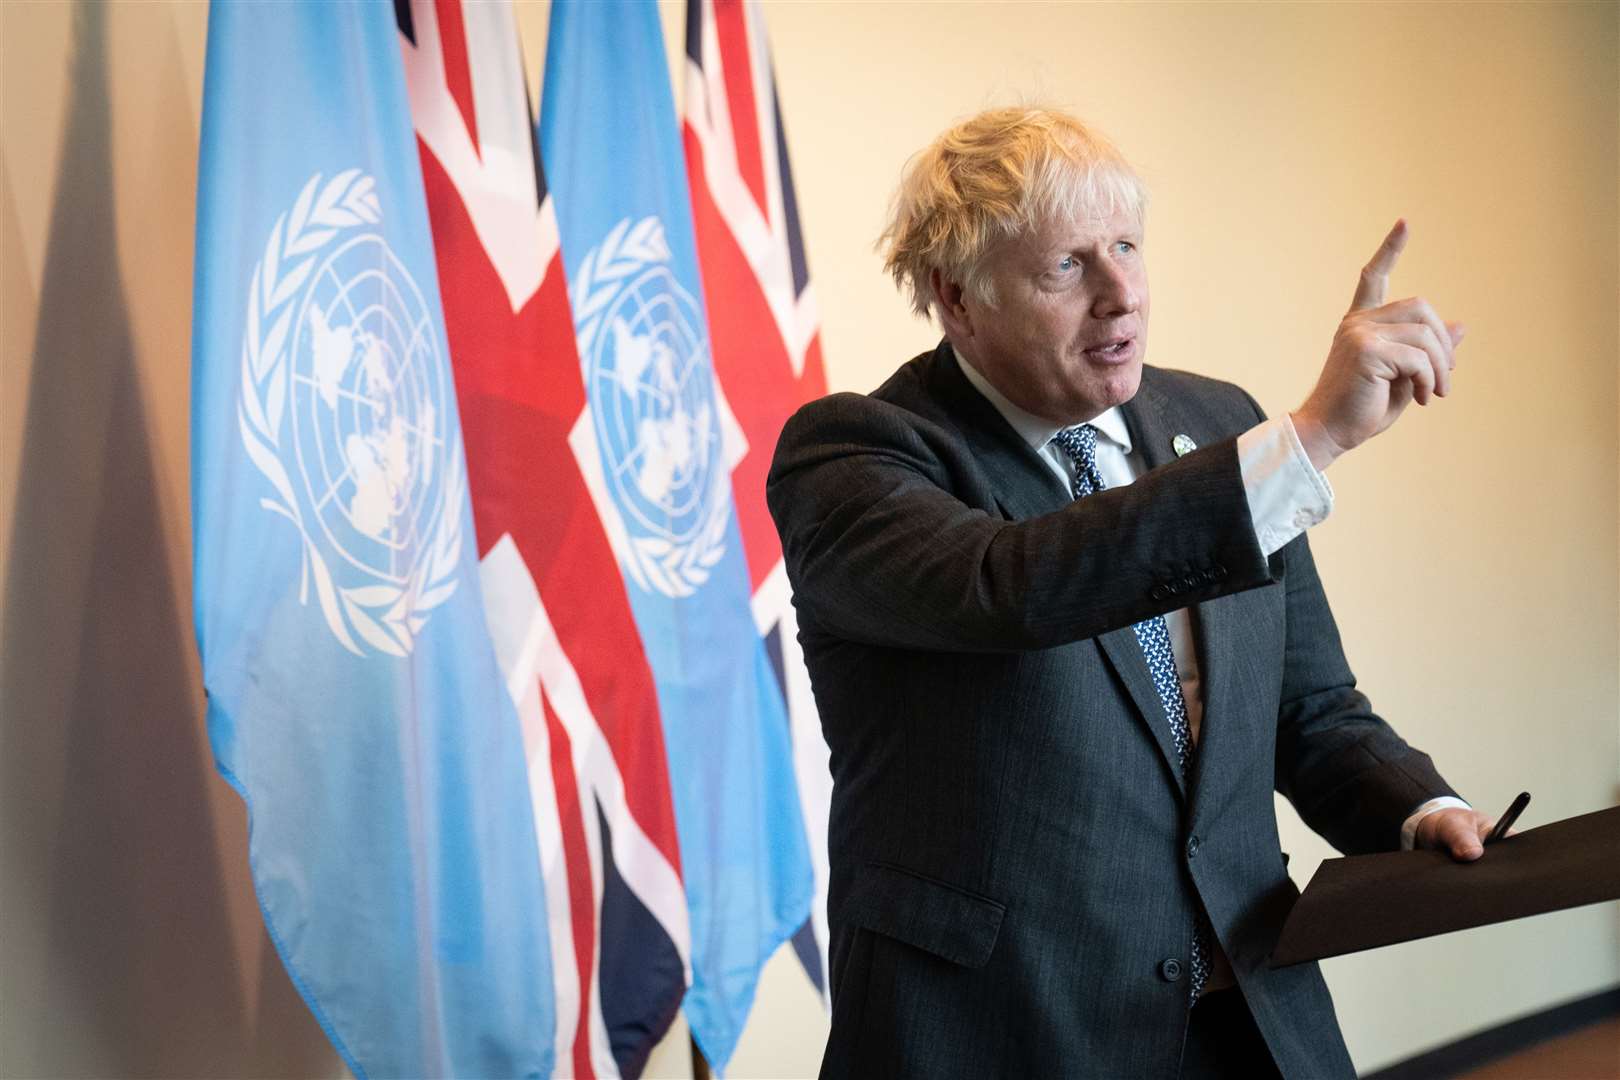 Prime Minister Boris Johnson addresses the media at the United Nations General Assembly (Stefan Rousseau/PA)